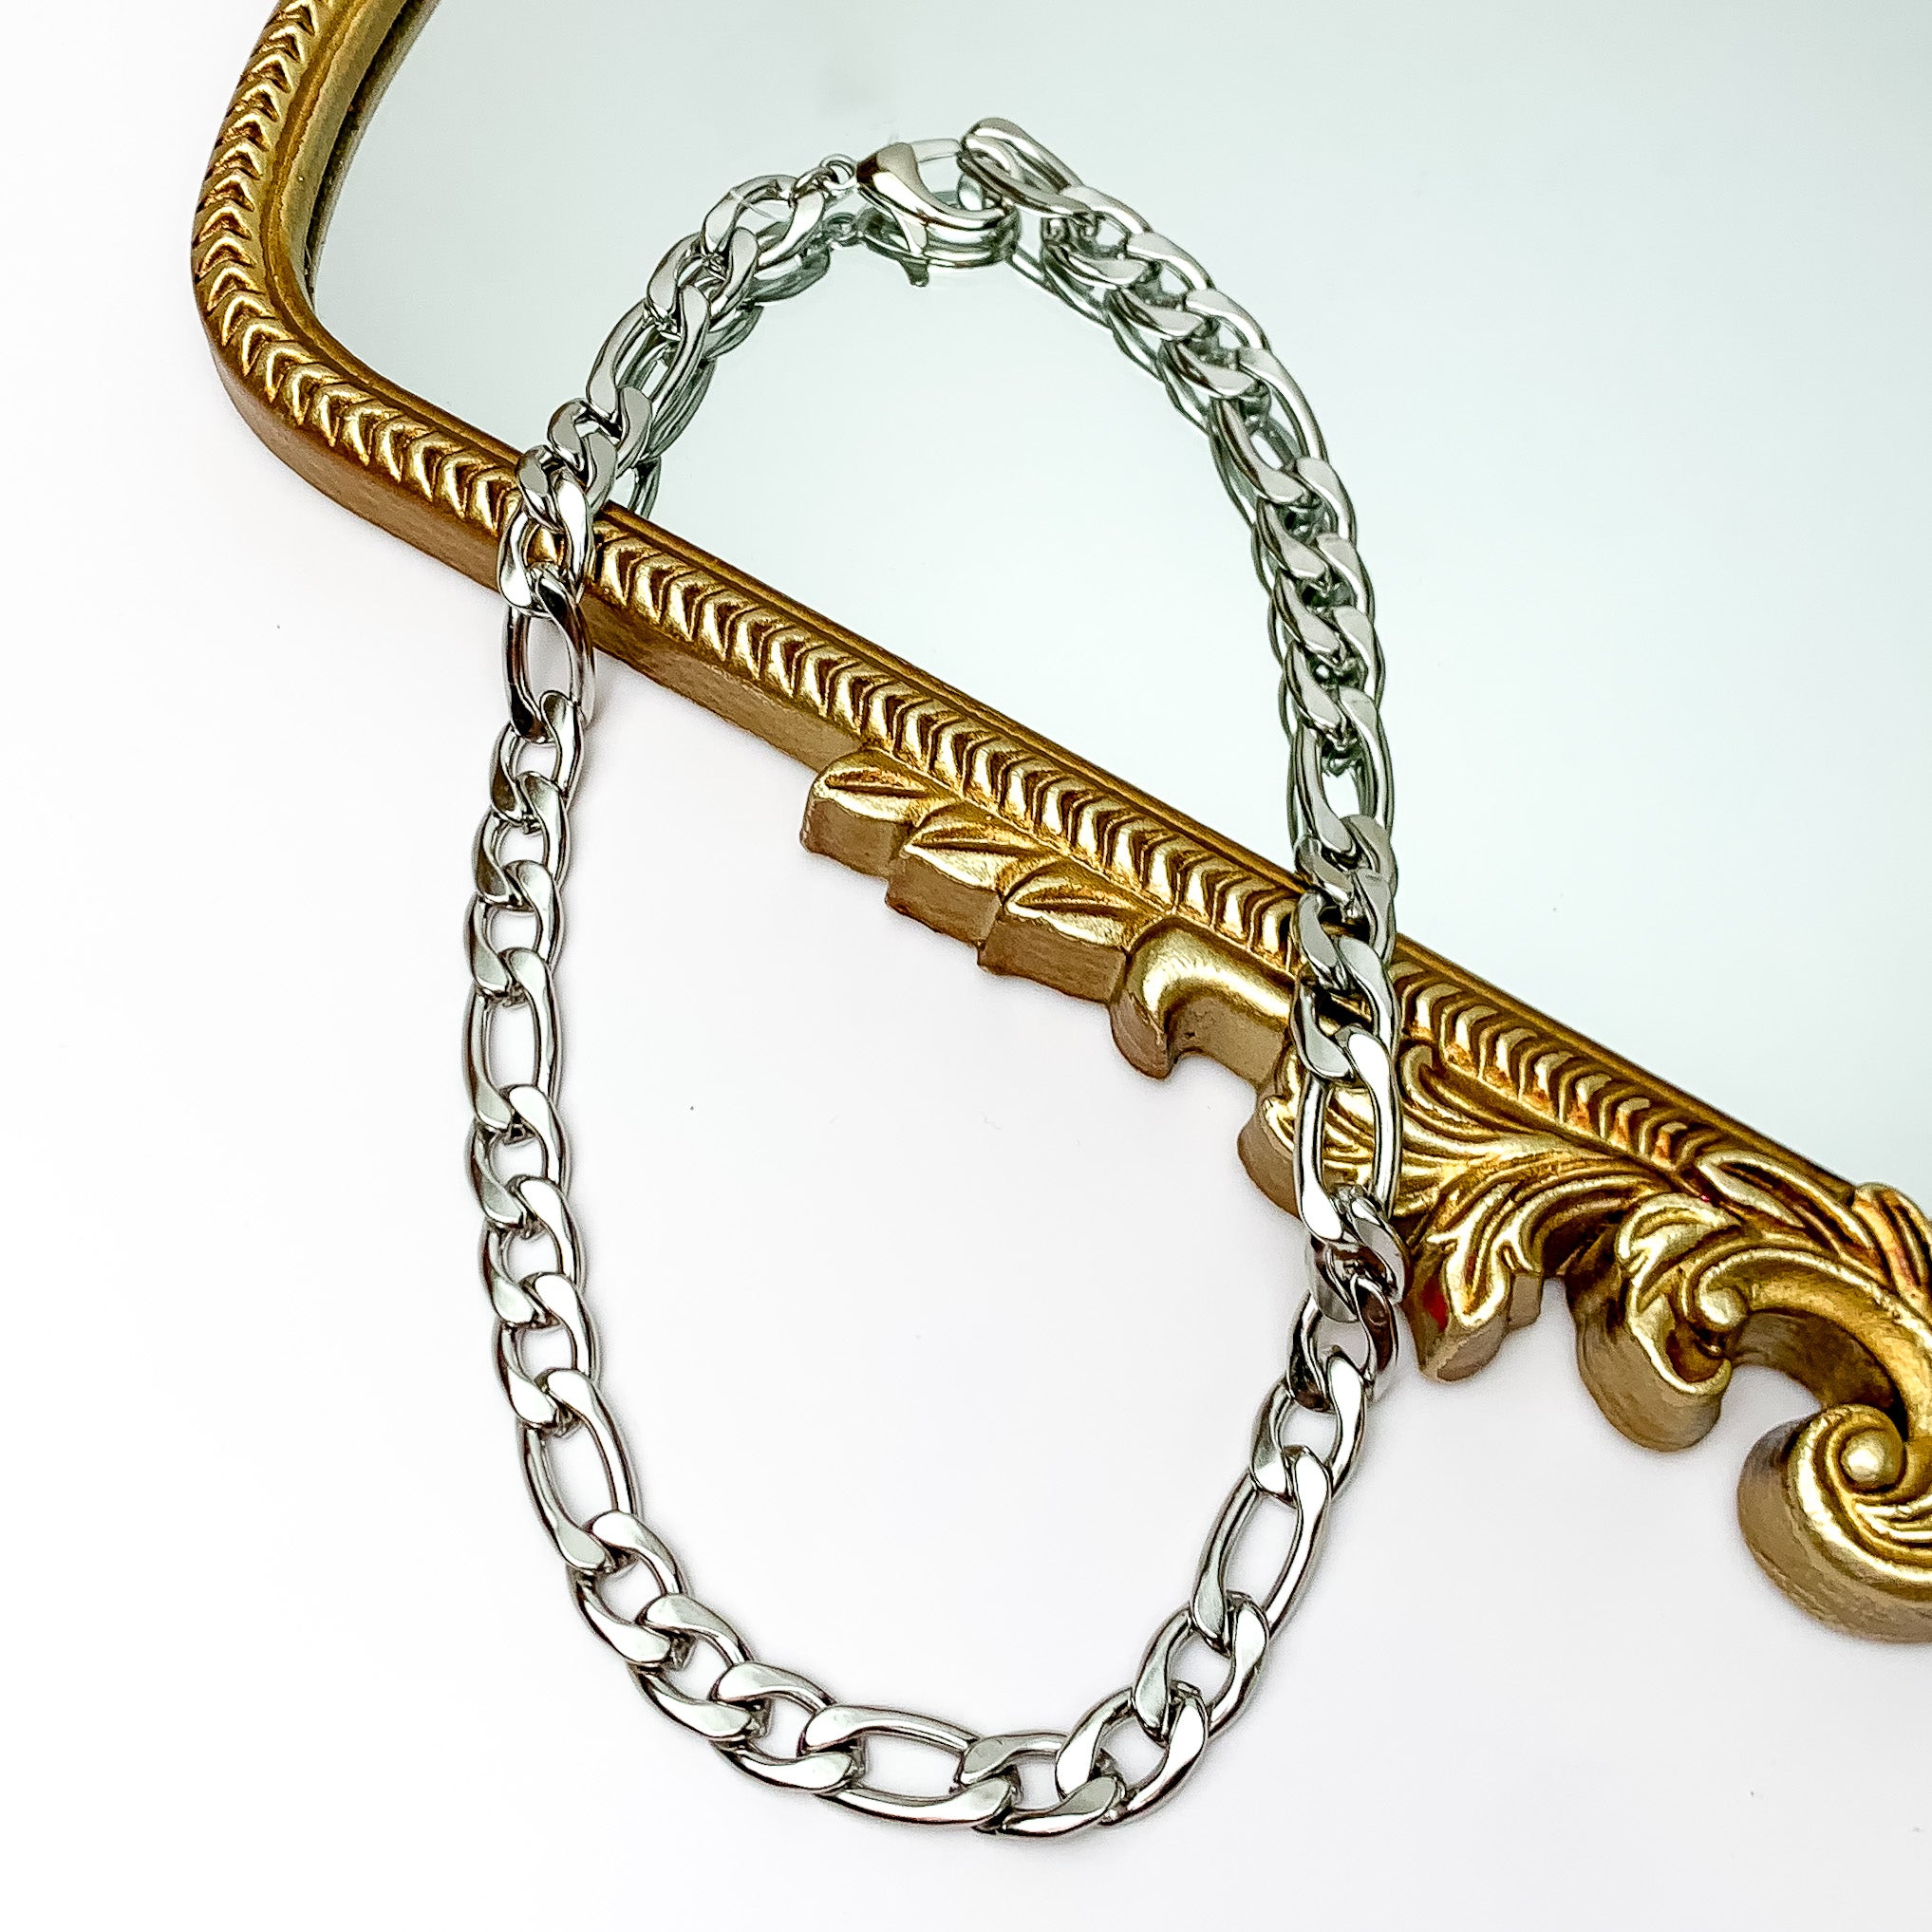 Pictured is a silver, curb chain necklace. This necklace is pictured partially laying on a gold mirror on a white background.  